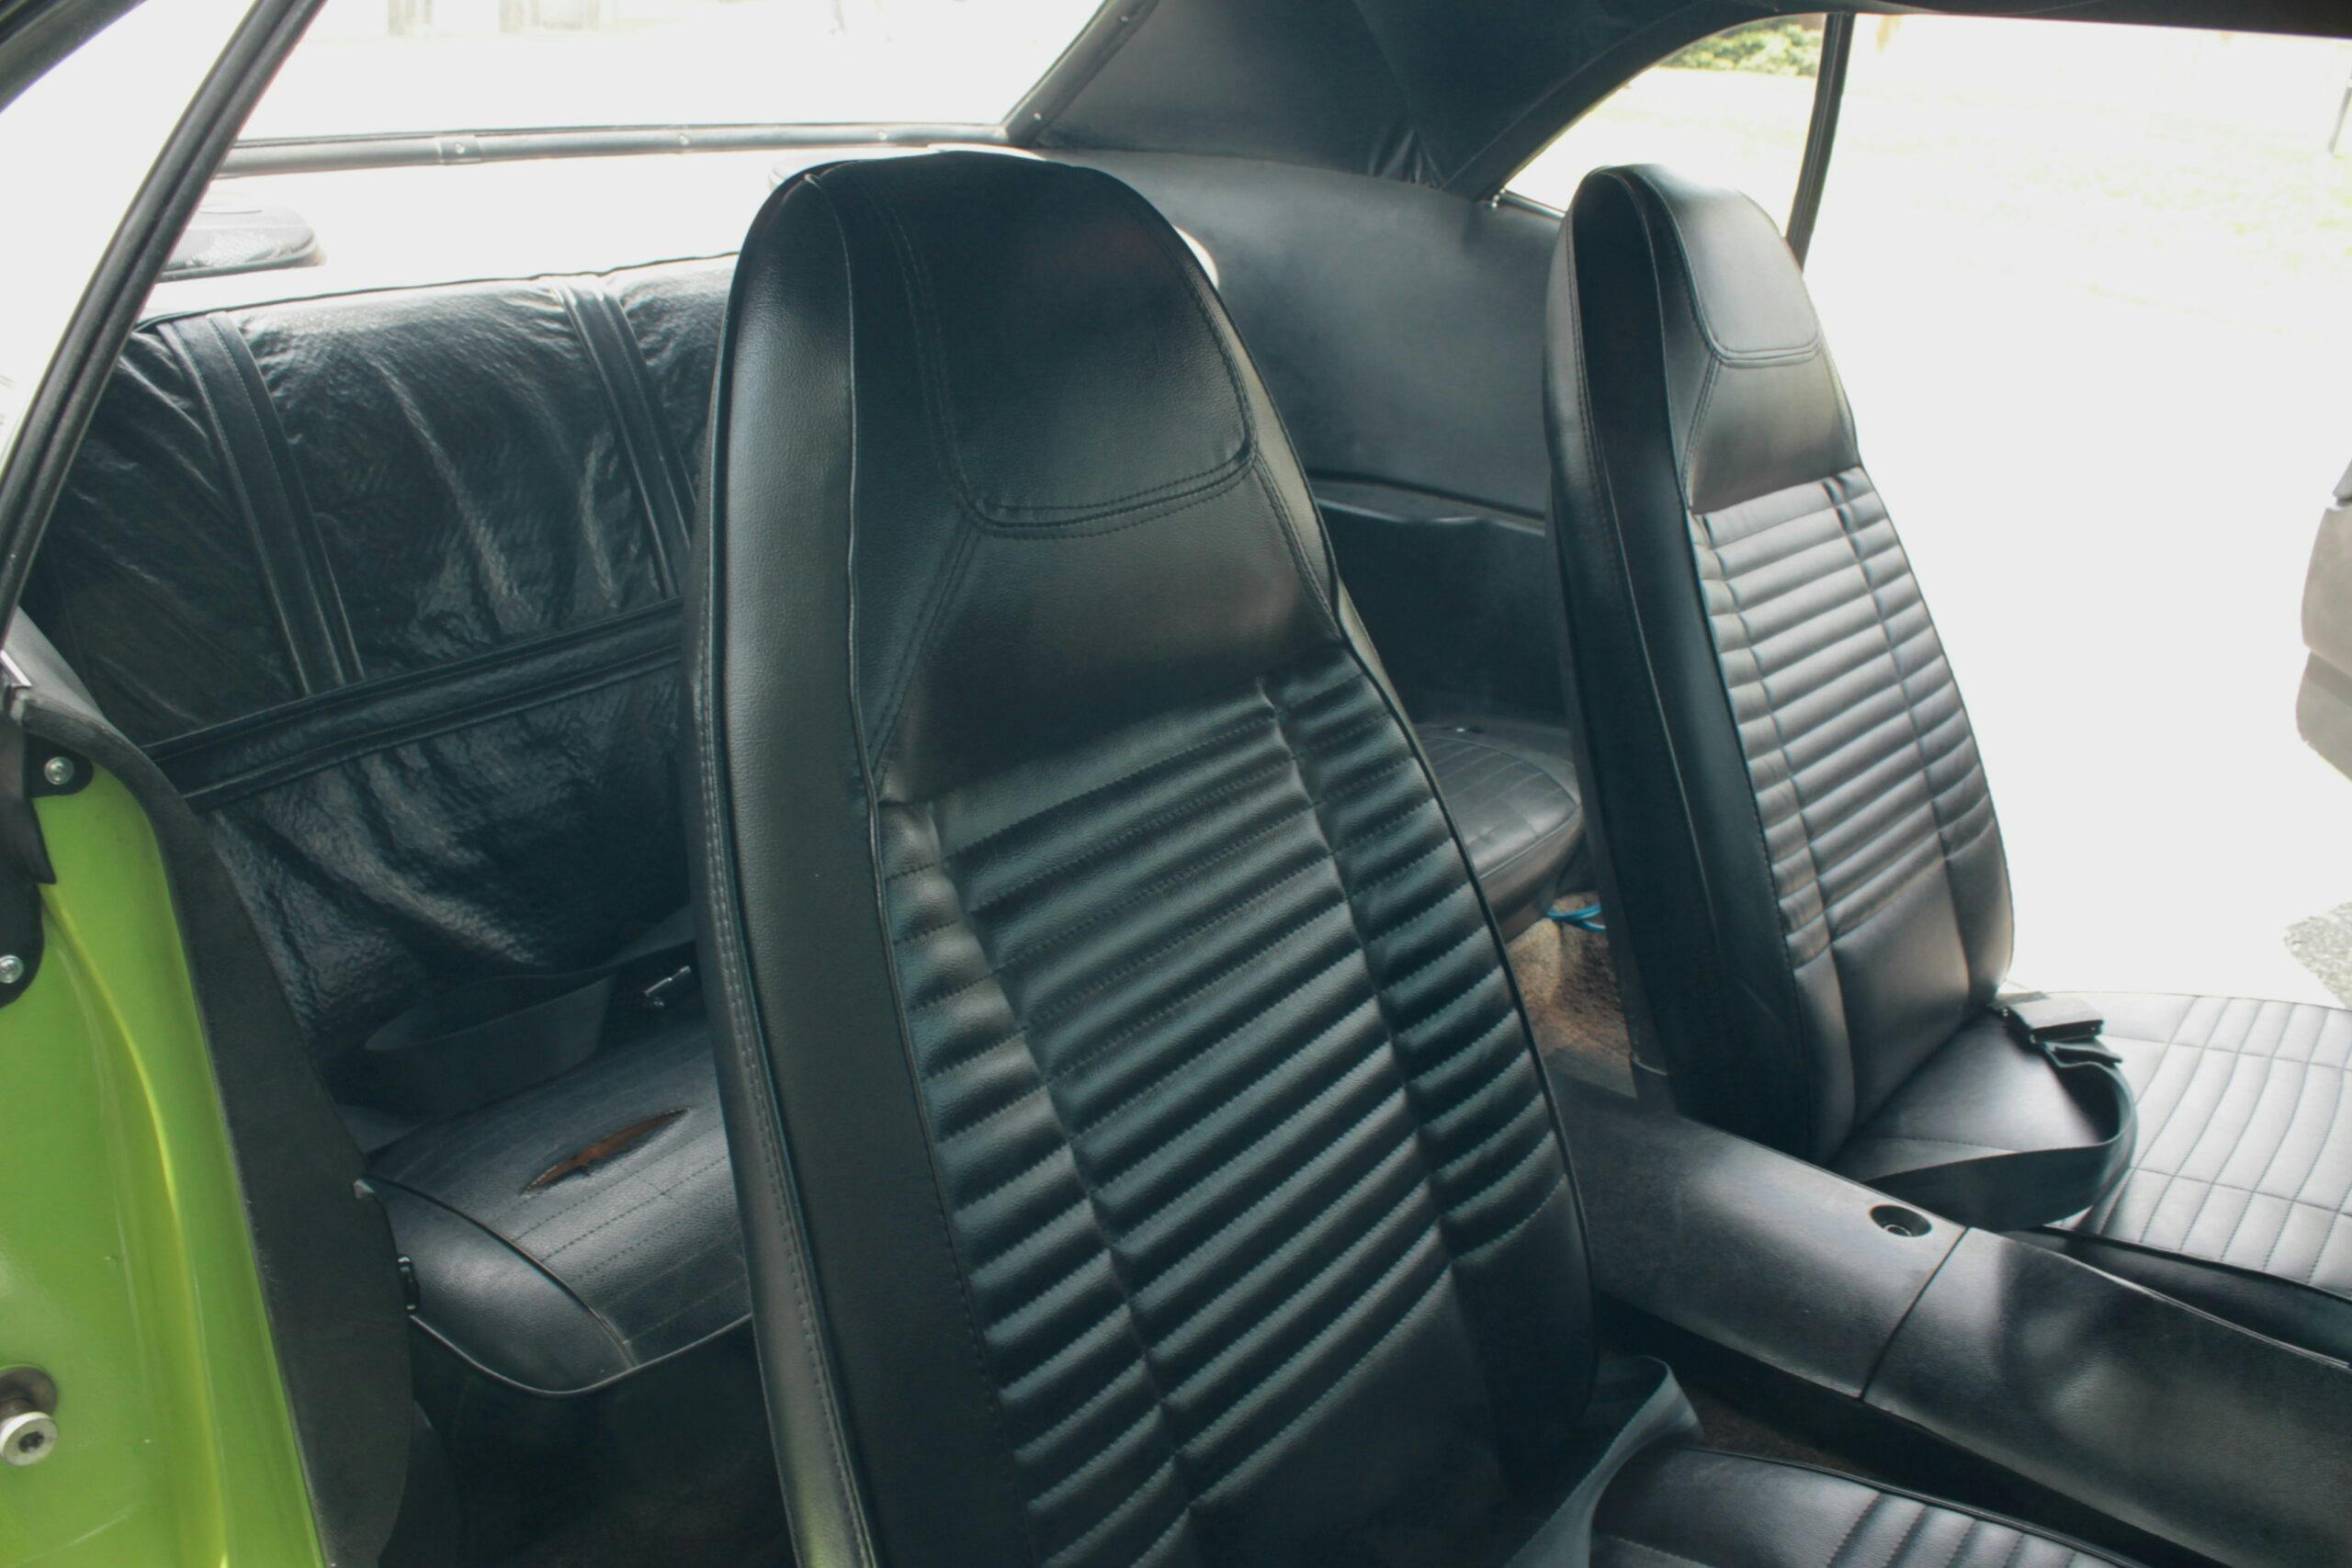 1970 Dodge Challenger high impact sublime interior seats